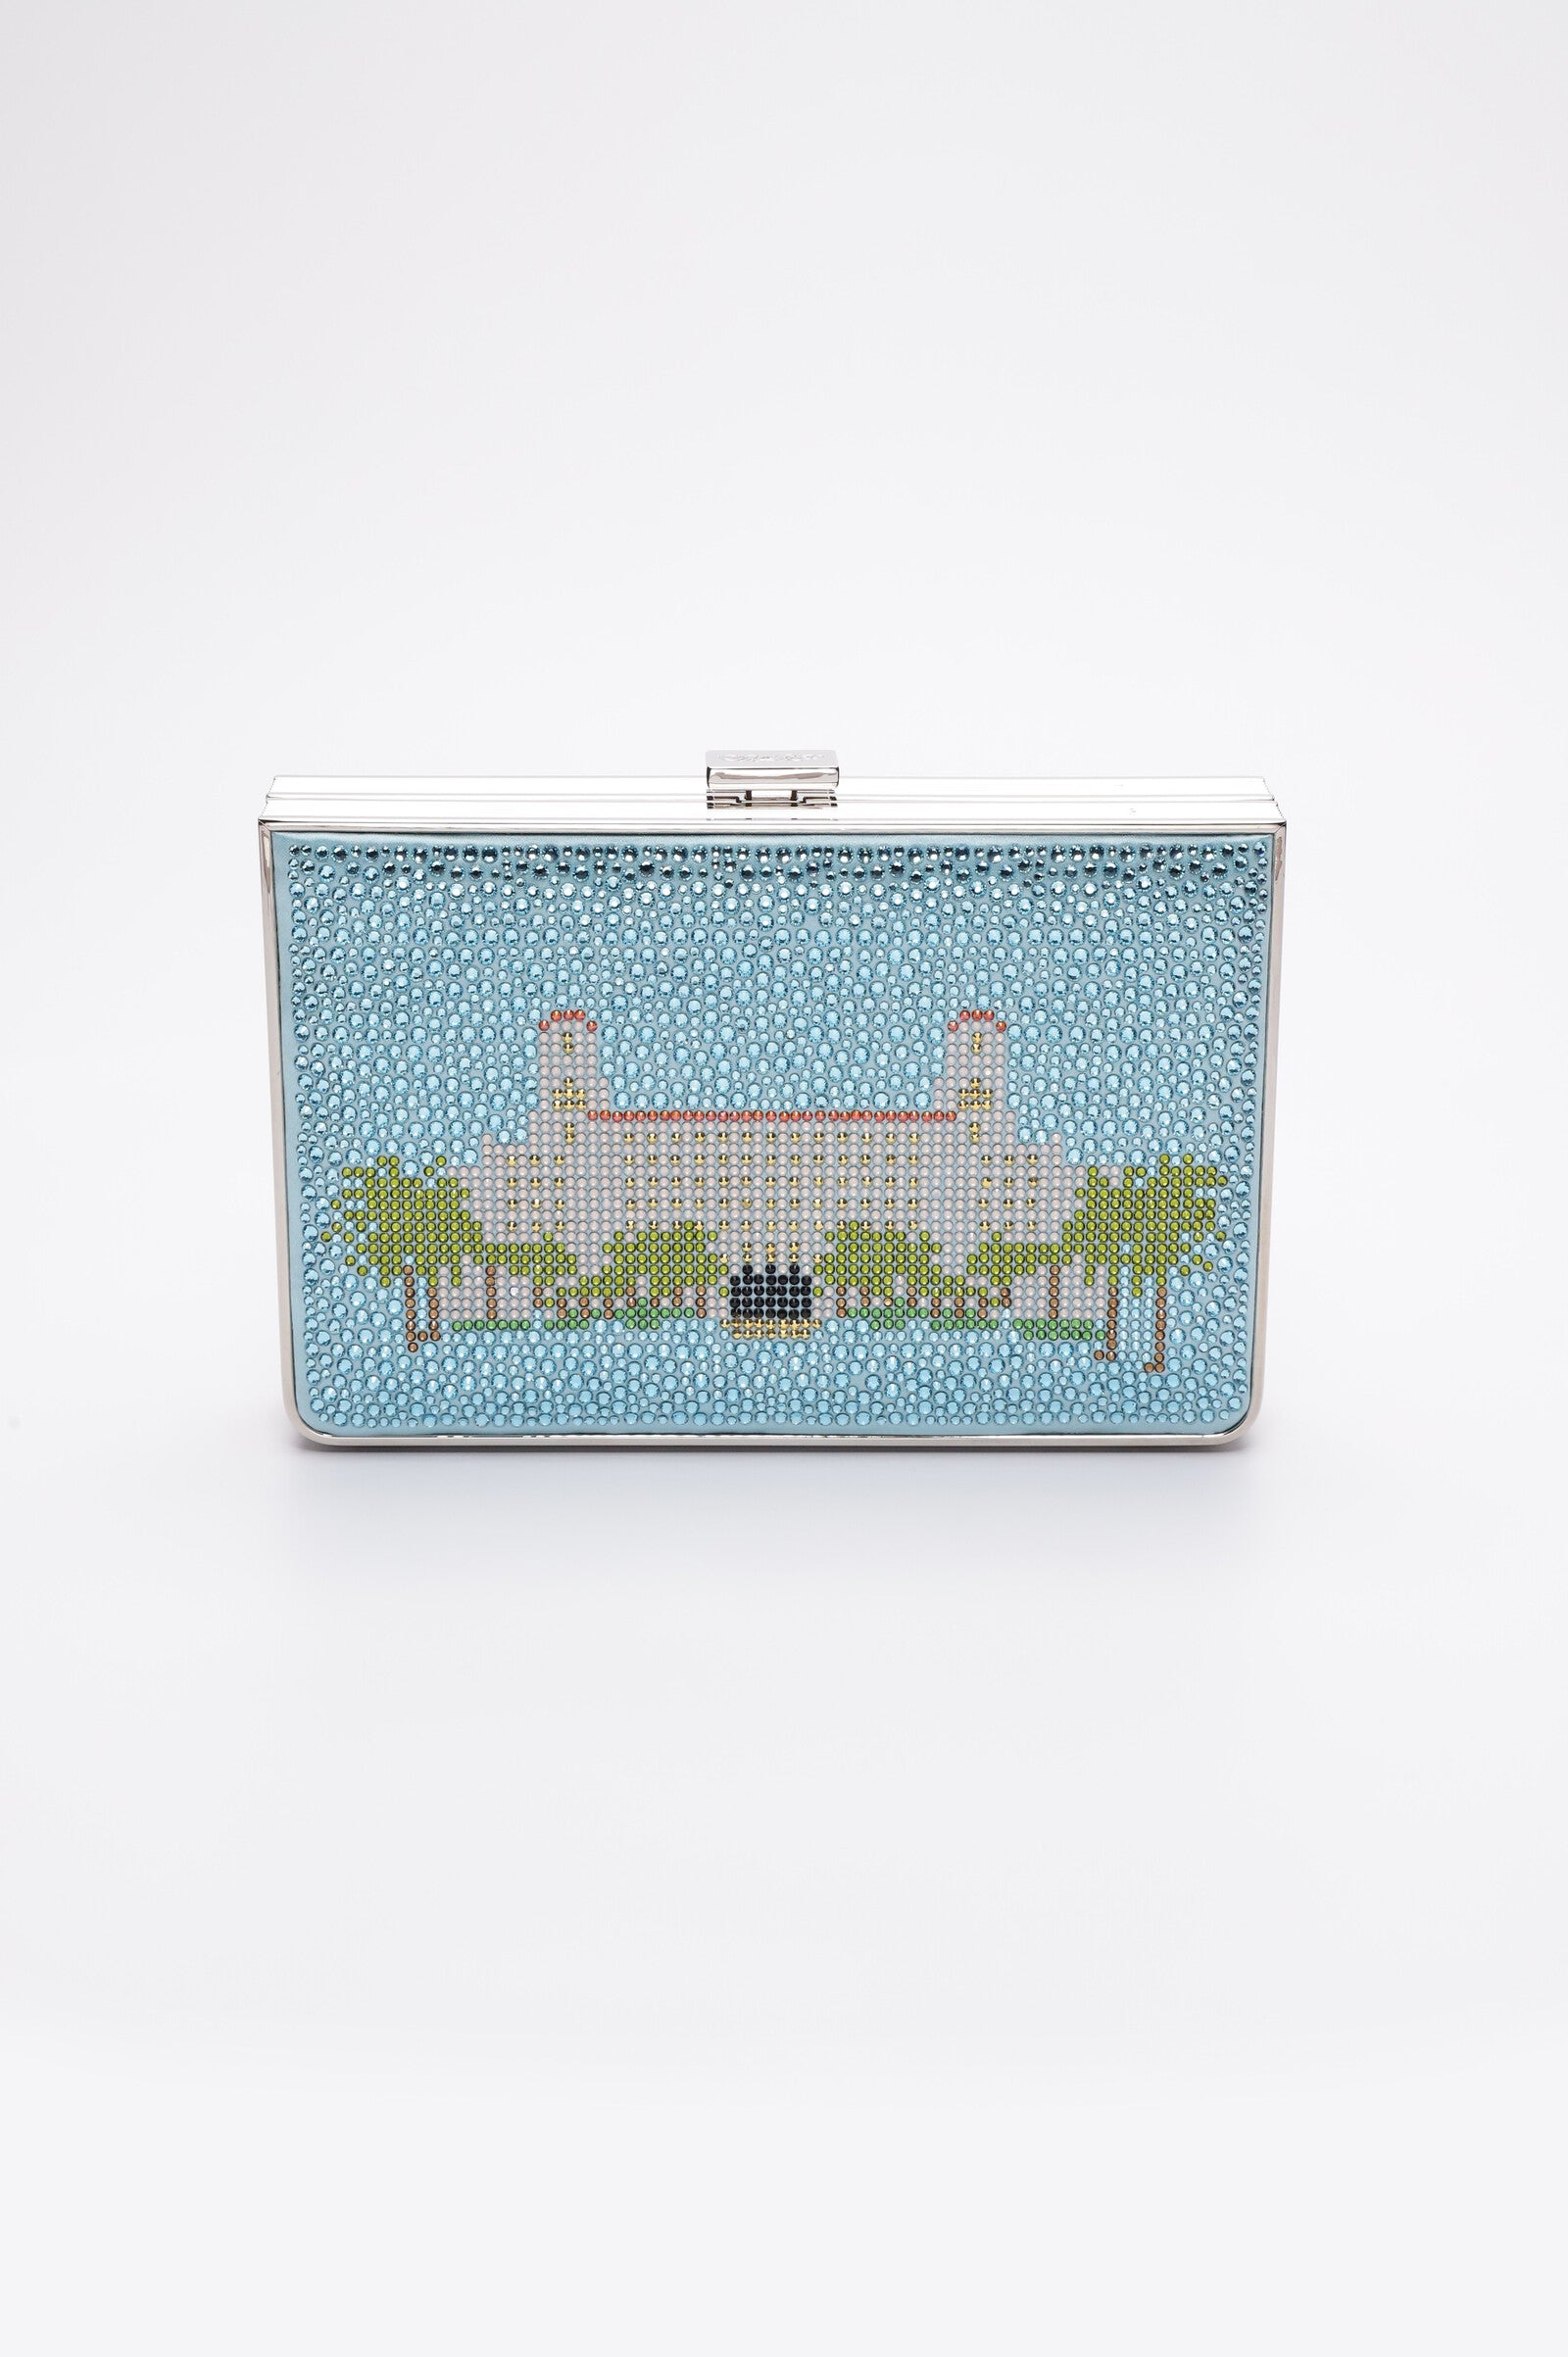 A Breakers Crystal Rhinestone Clutch from The Bella Rosa Collection with a palm tree pattern.